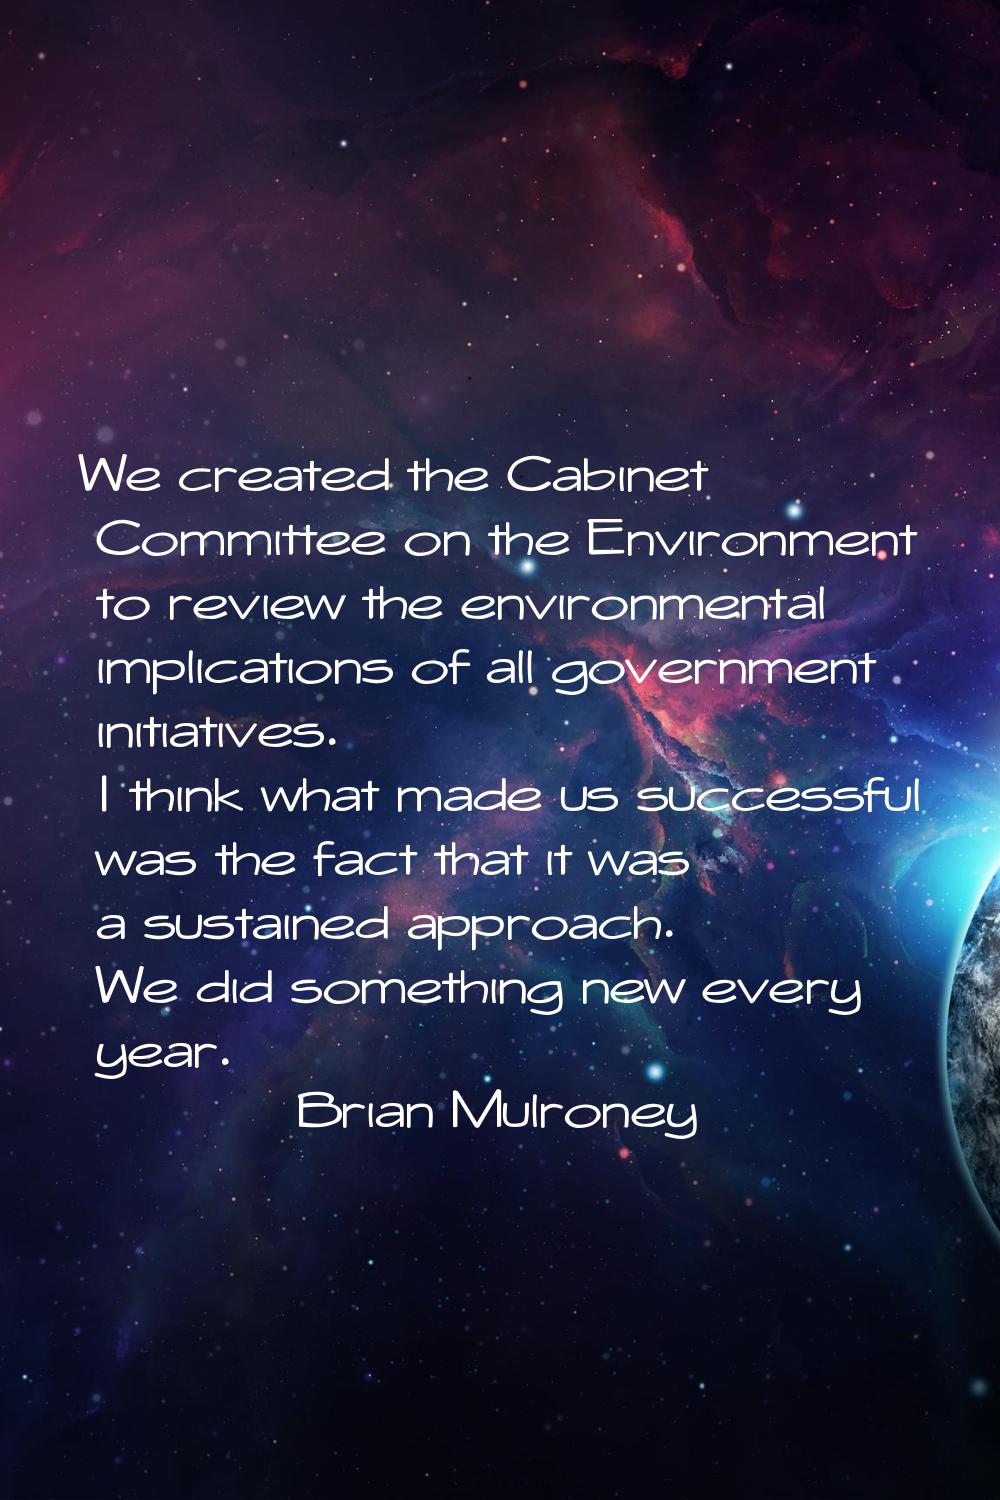 We created the Cabinet Committee on the Environment to review the environmental implications of all